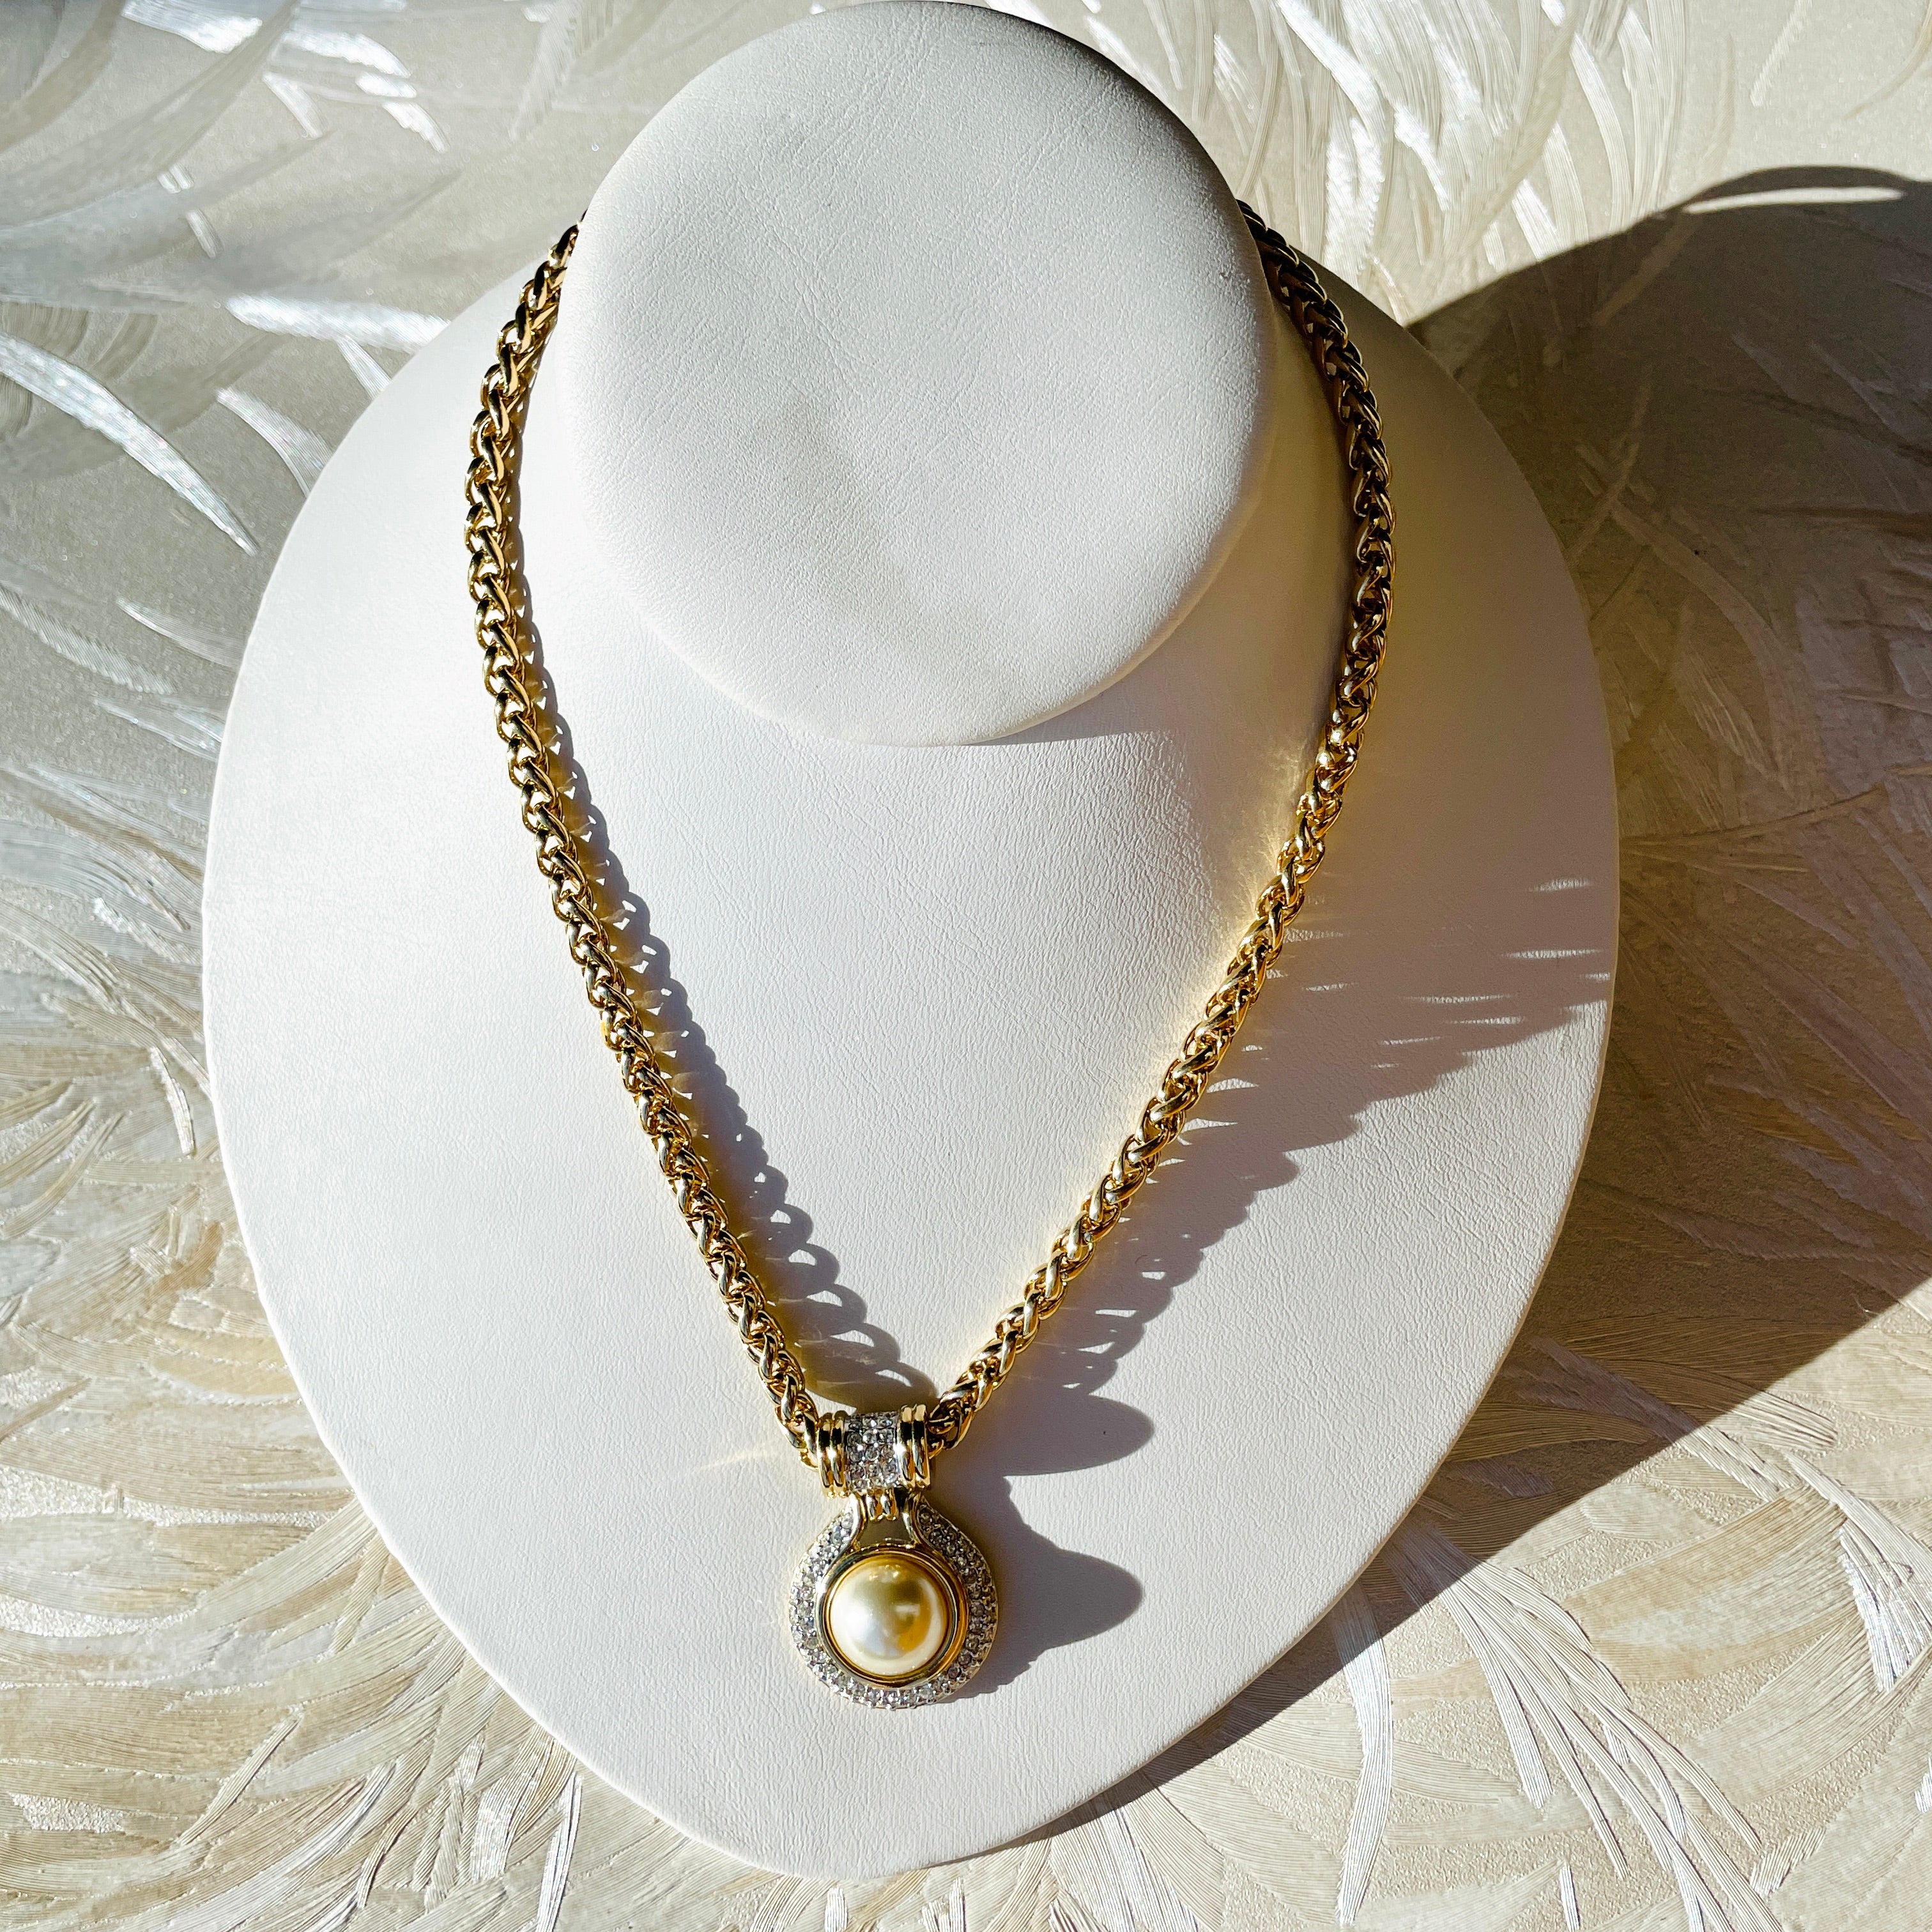 Luxe Gold Chain Rhinestone Necklace + Earrings